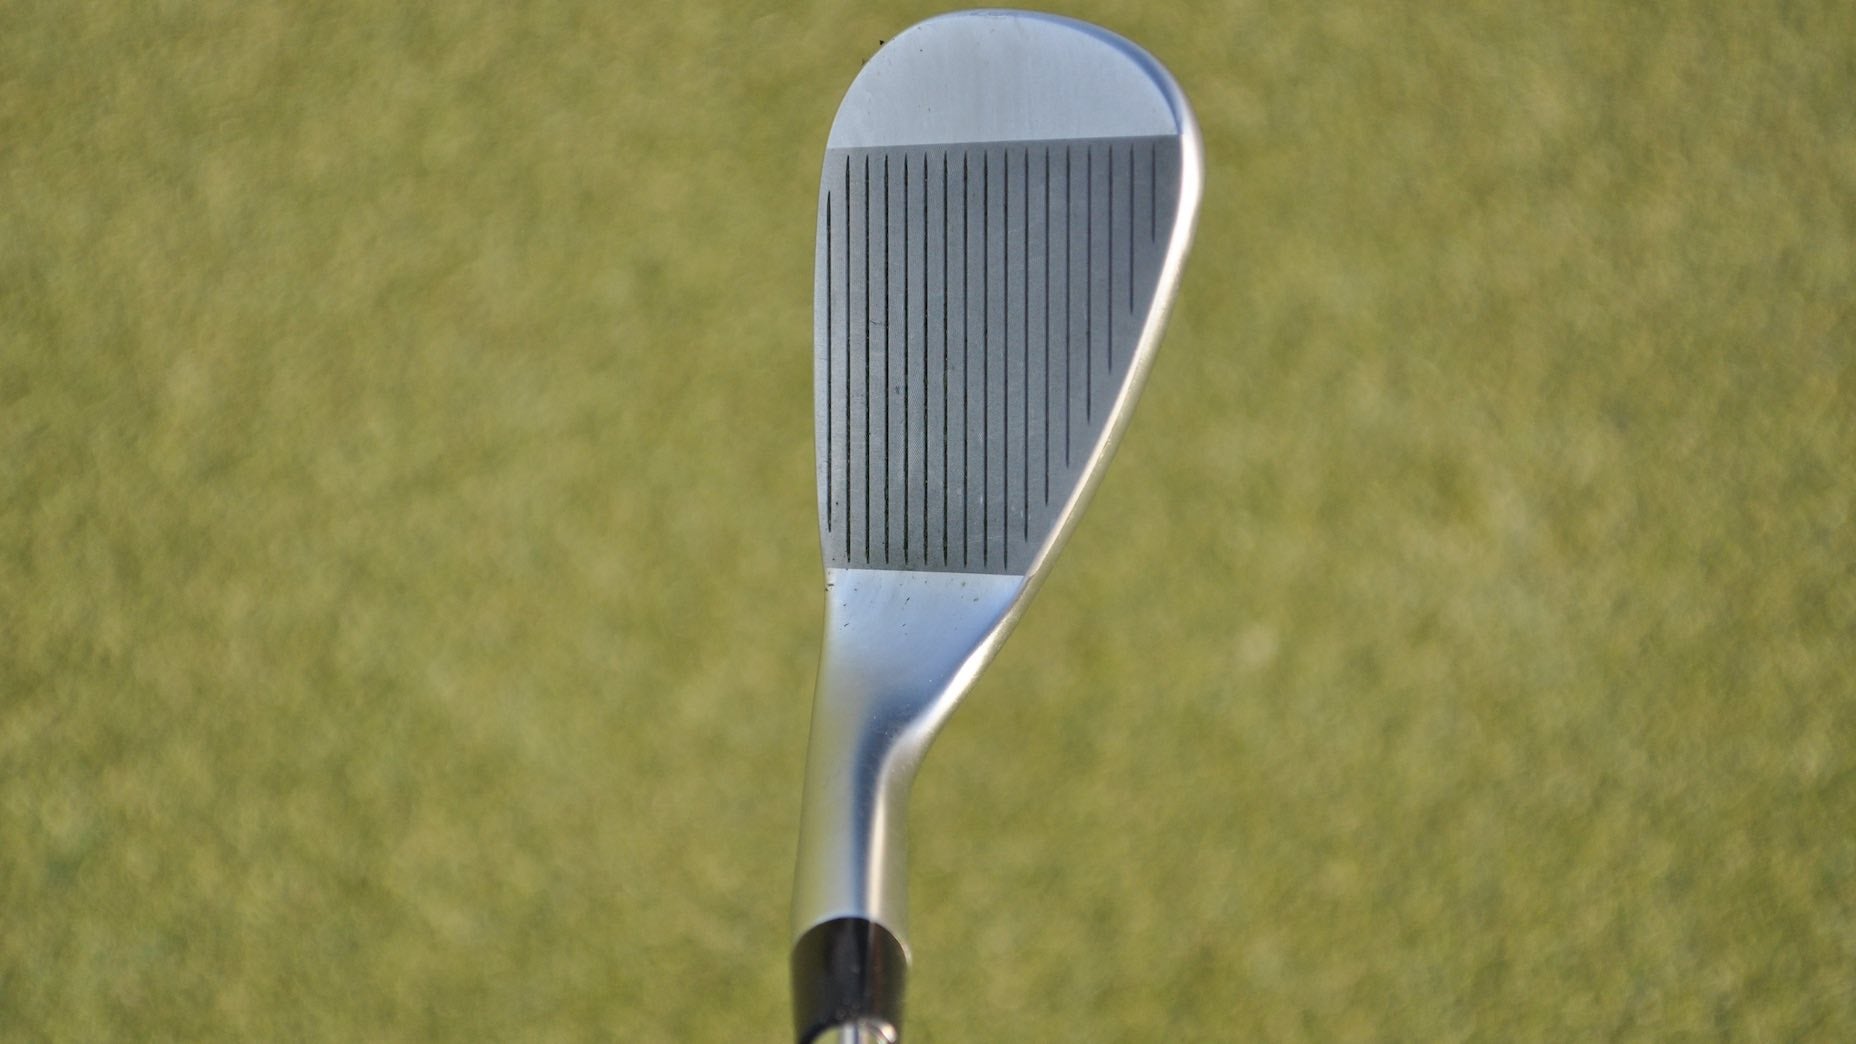 Ping's Glide 4.0 wedge delivers lower launch, more spin